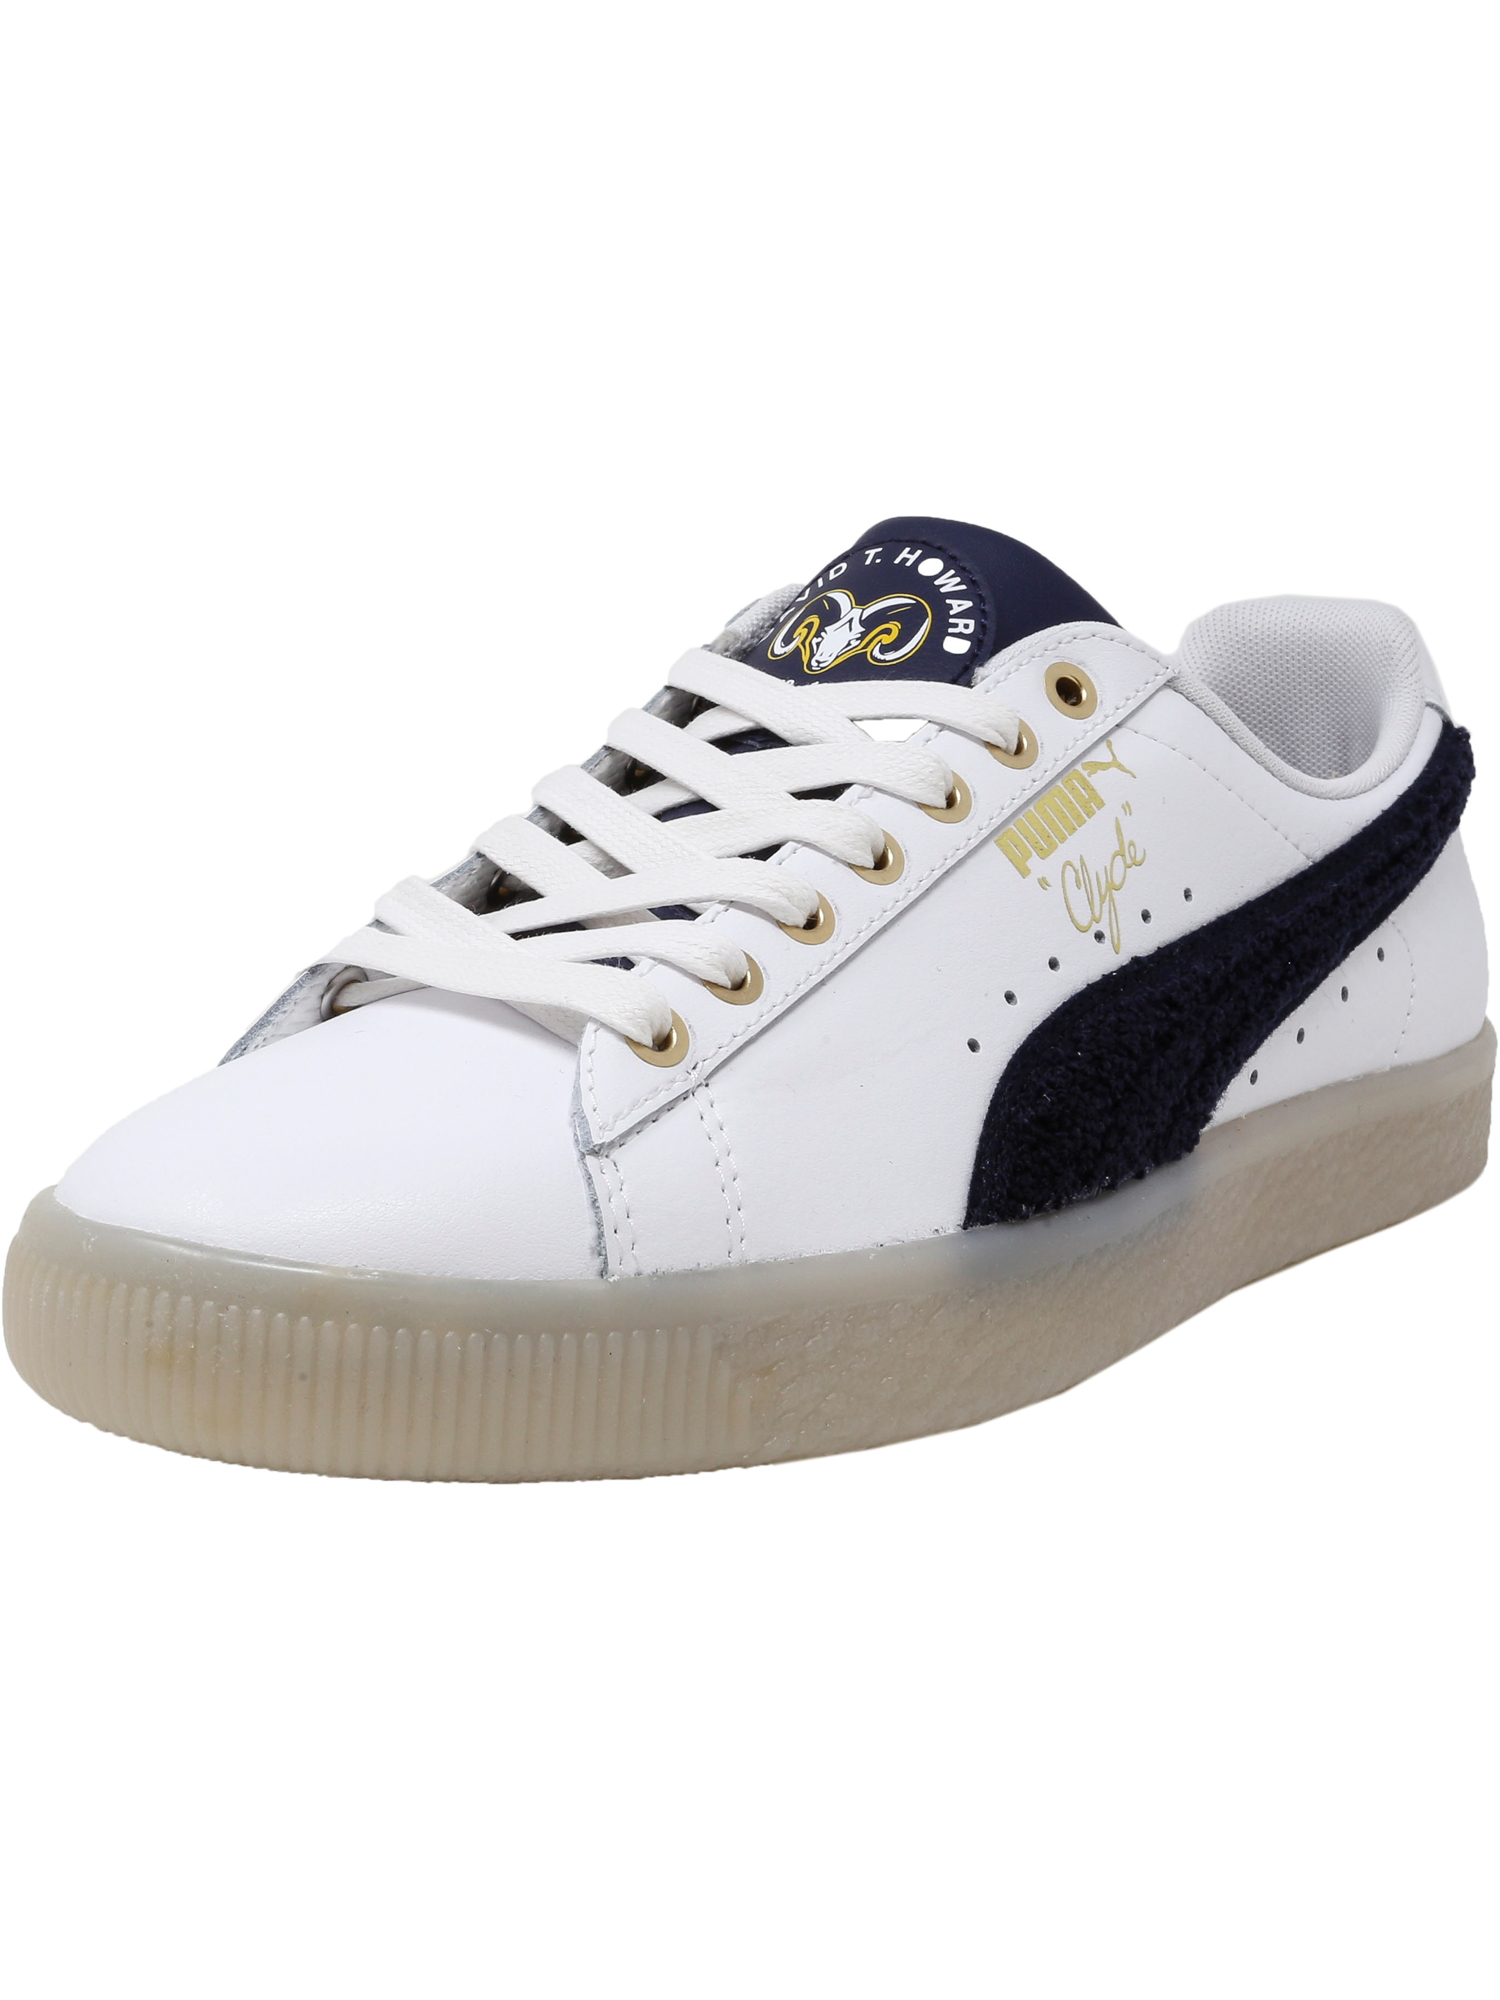 Puma Men's Clyde Leather Bhm Ankle-high 